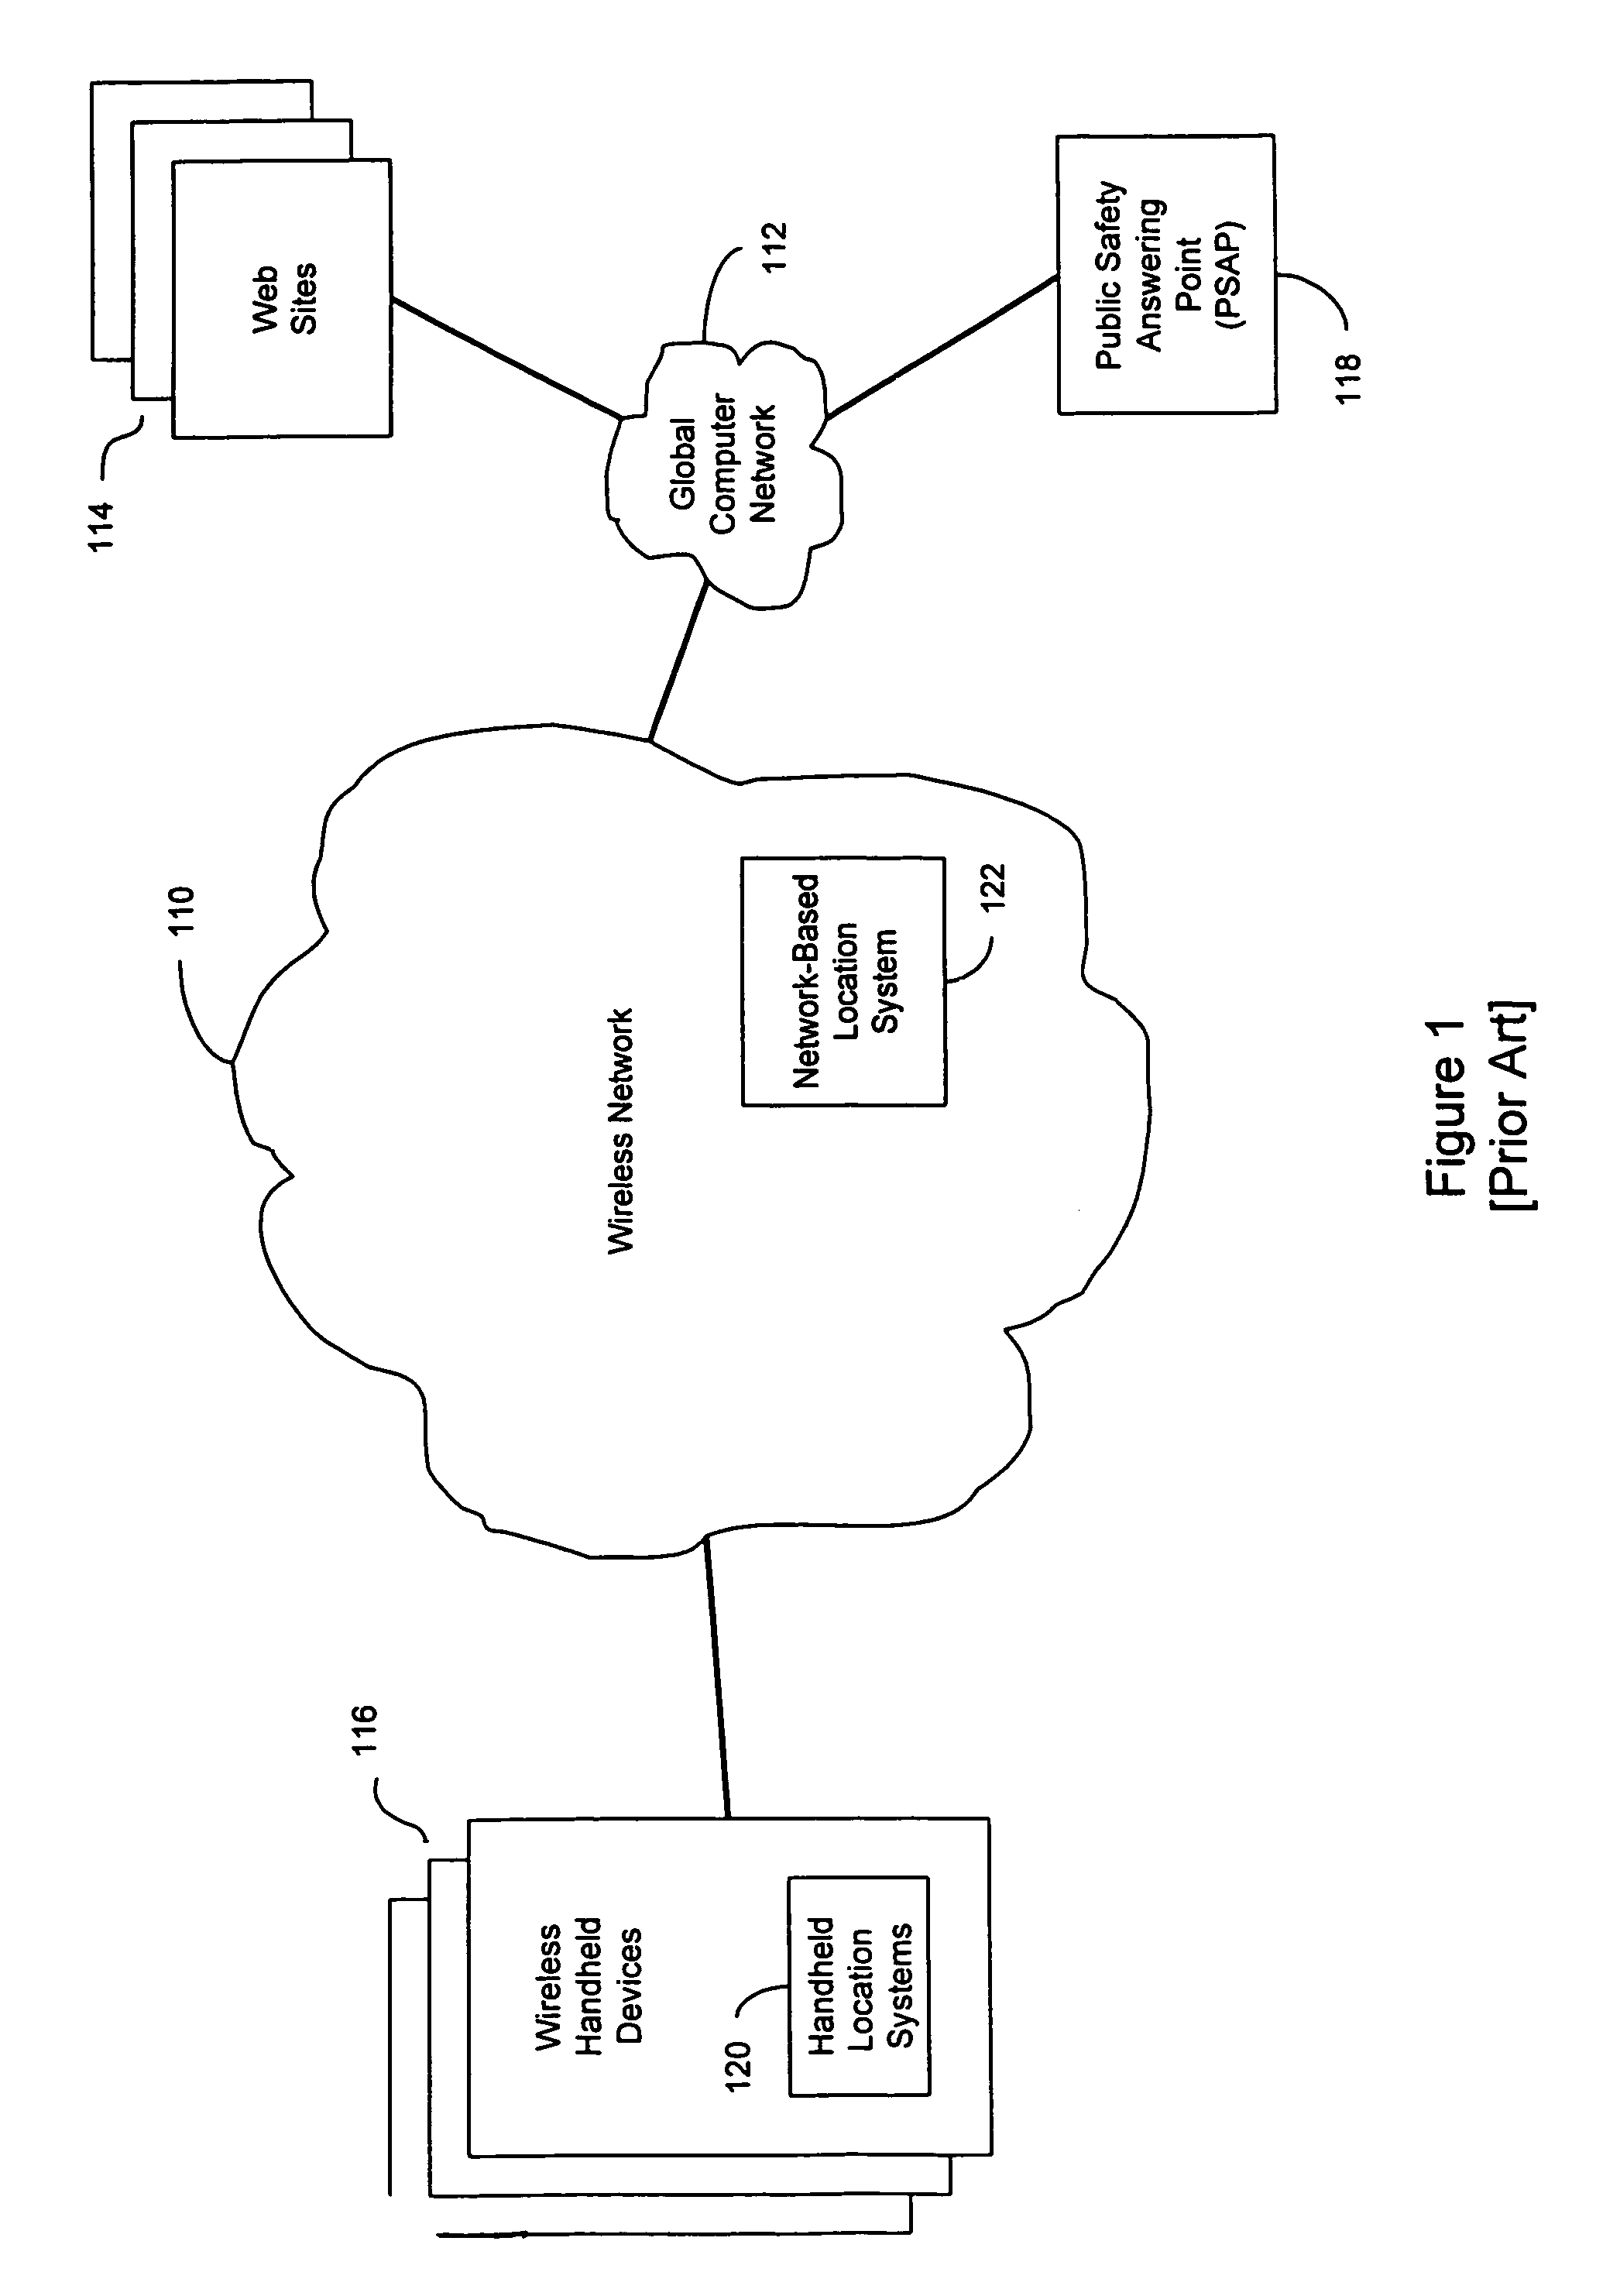 Location blocking service for wireless networks